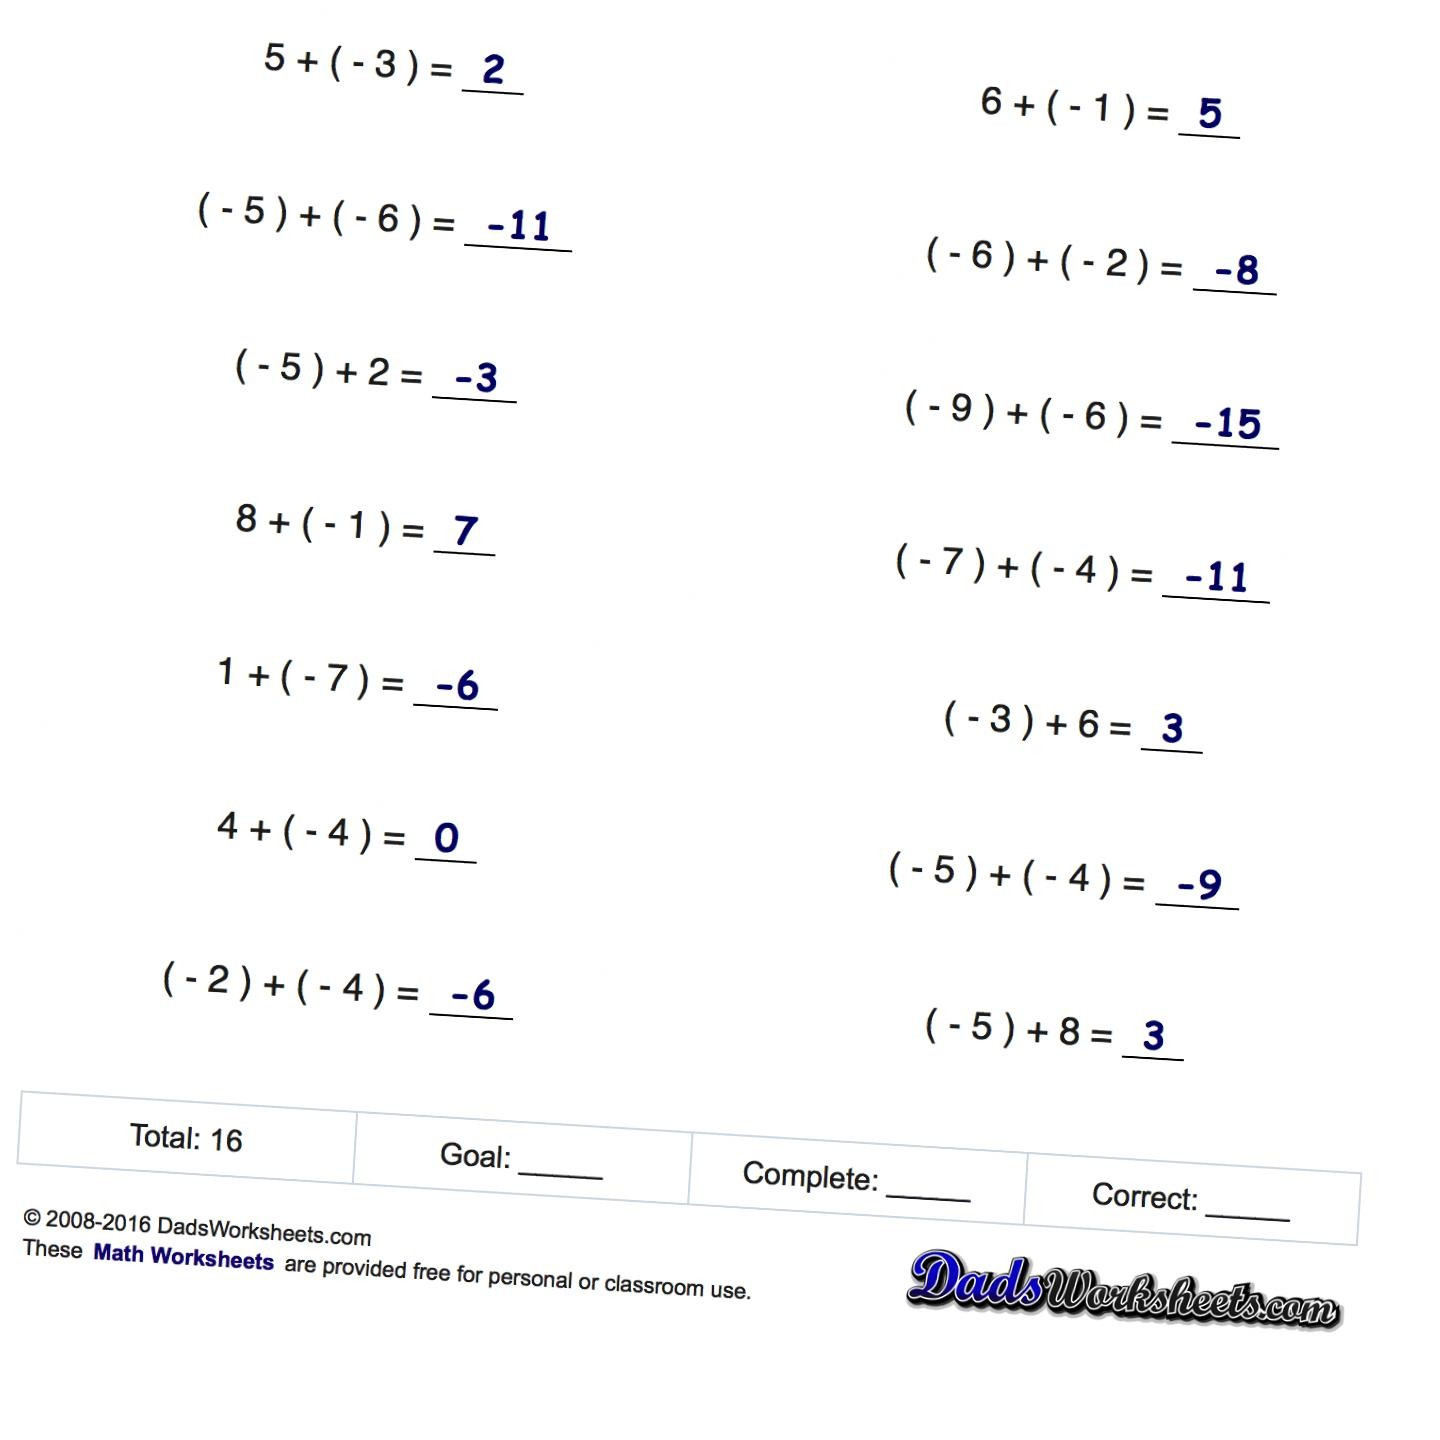 Free Math Worksheets Third Grade 3 Addition Add 2 Digit Numbers In Columns with Regrouping